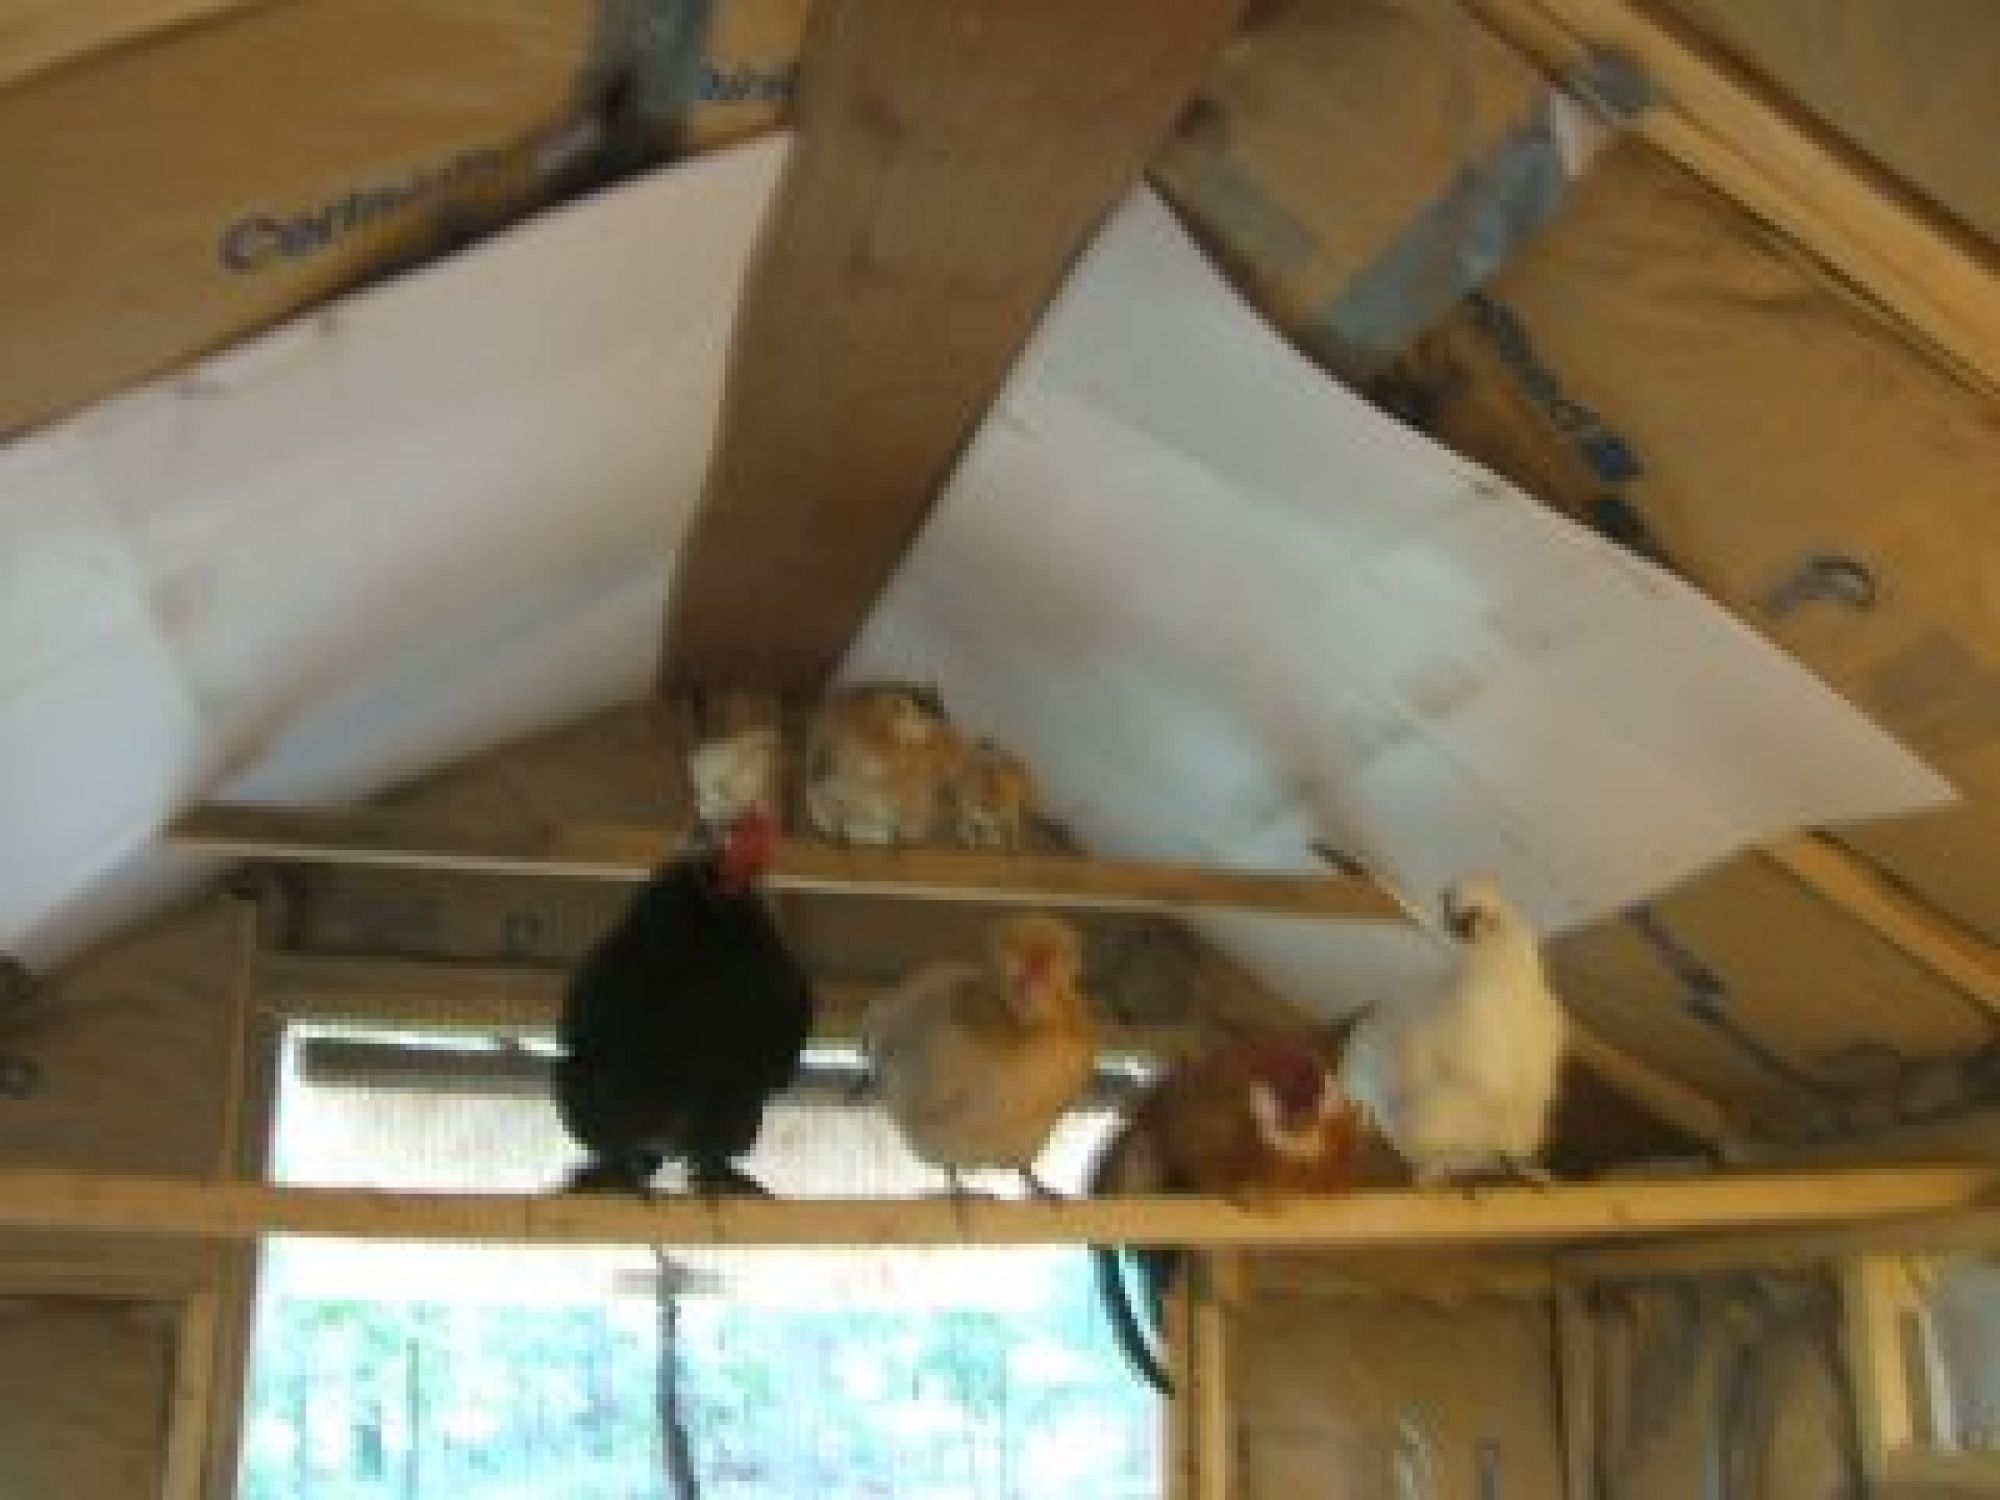 All the chickens getting into their favorite roosting spots for the night.